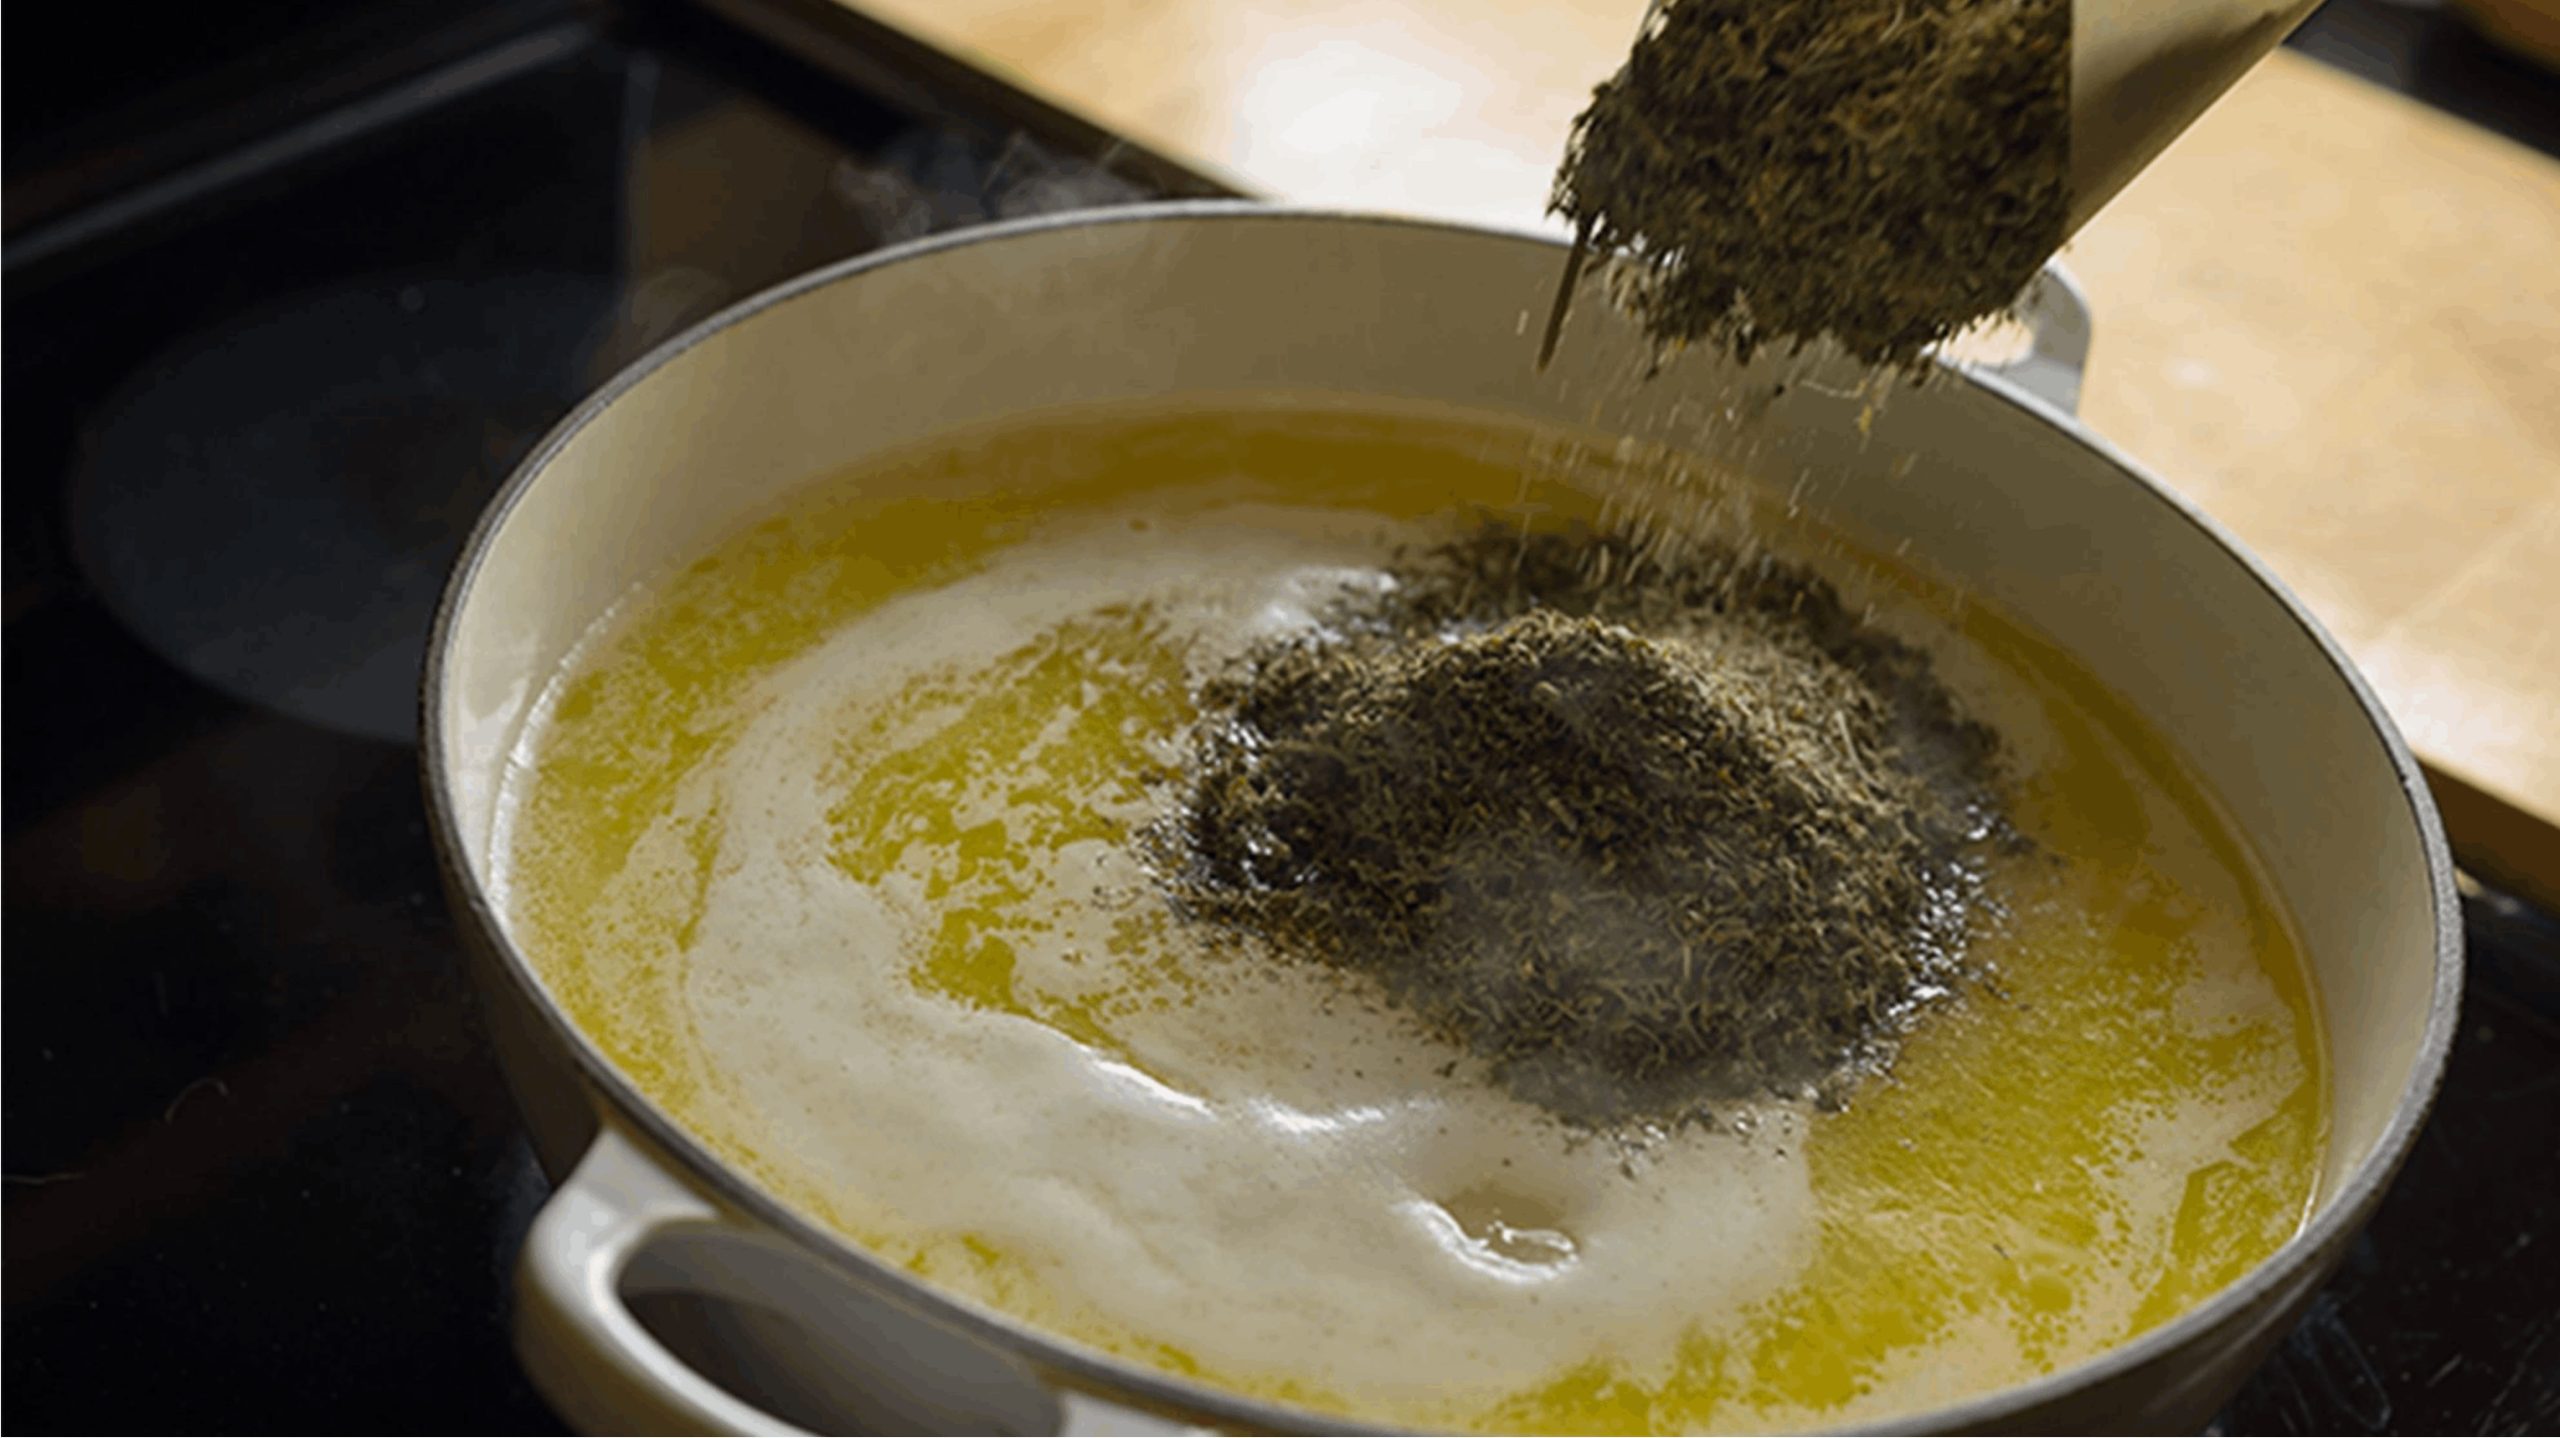 Learning how to make cannabutter can be a fun and rewarding experience. It allows you to learn more about cannabis and the various ways it can be consumed. 